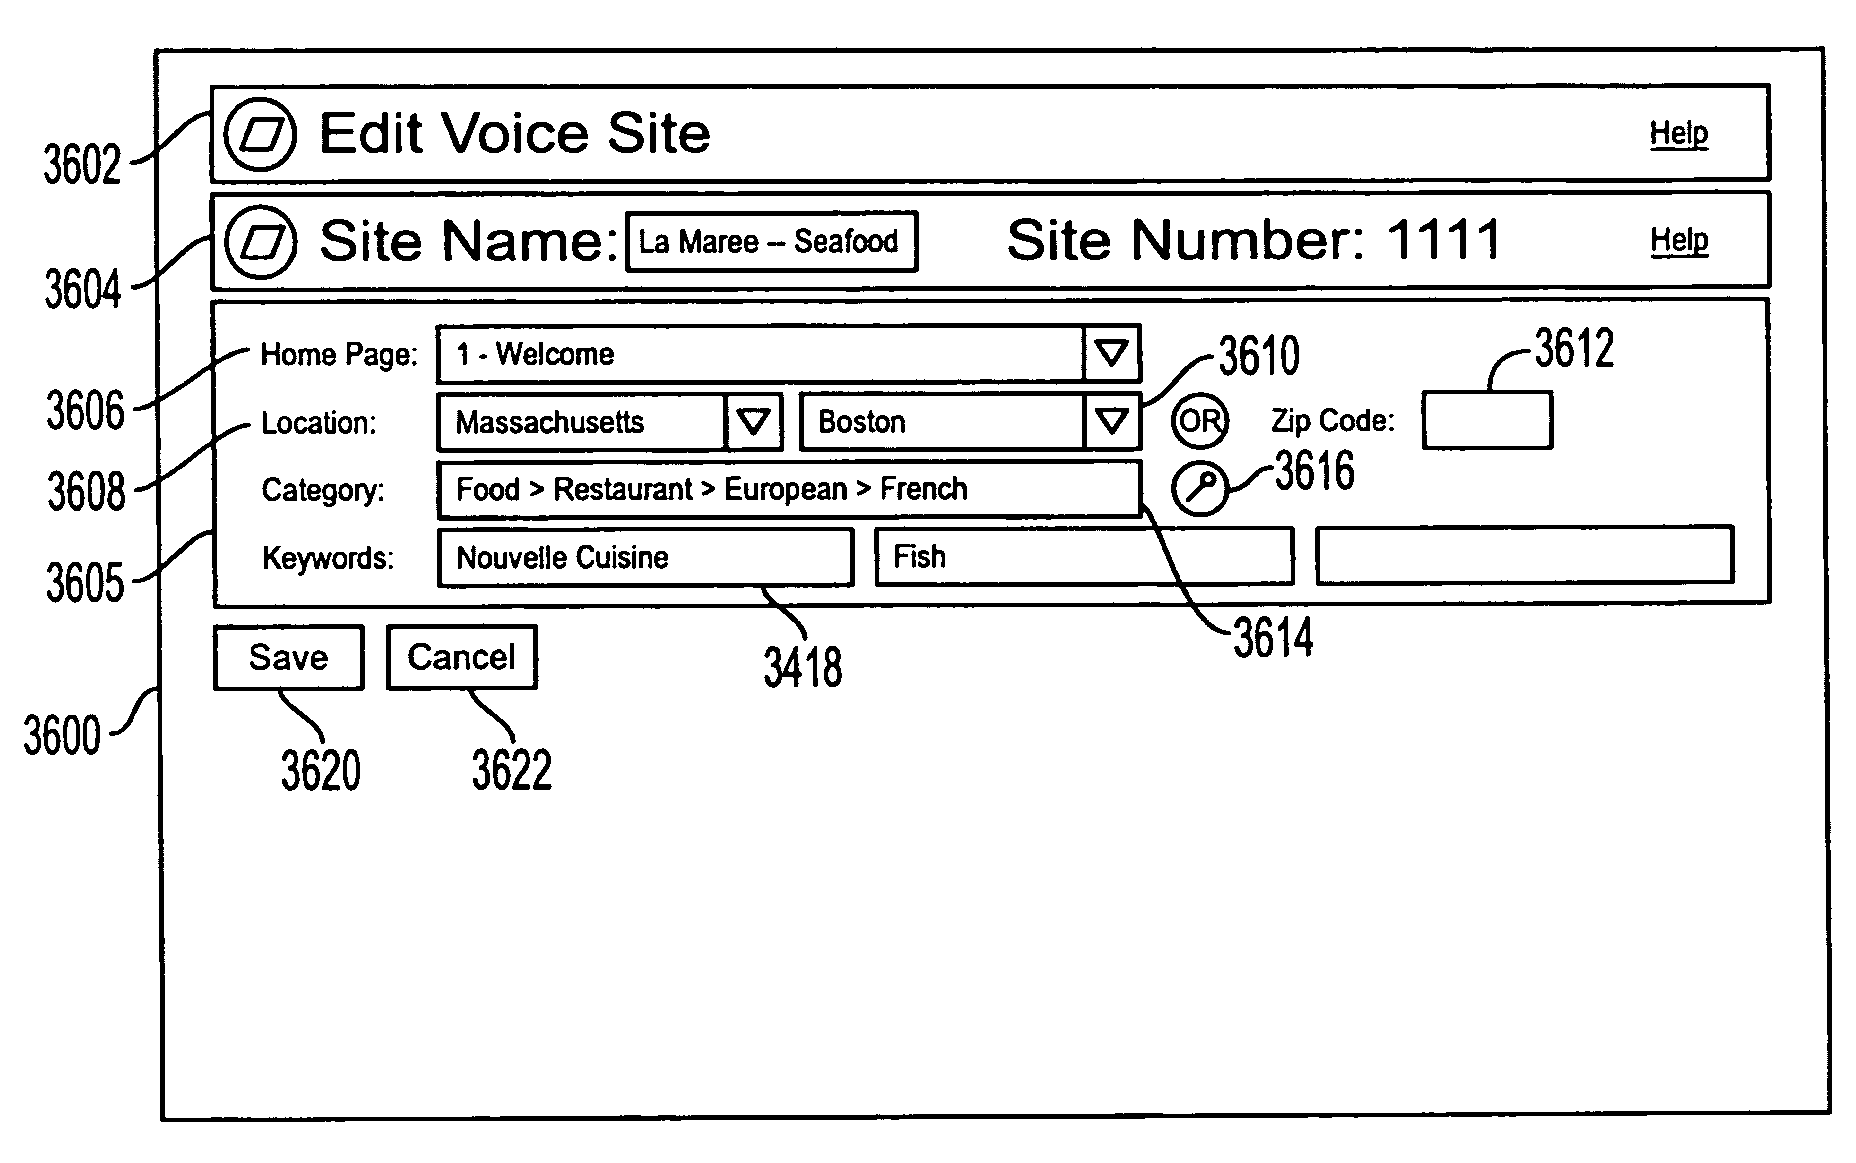 Voice page directory system in a voice page creation and delivery system